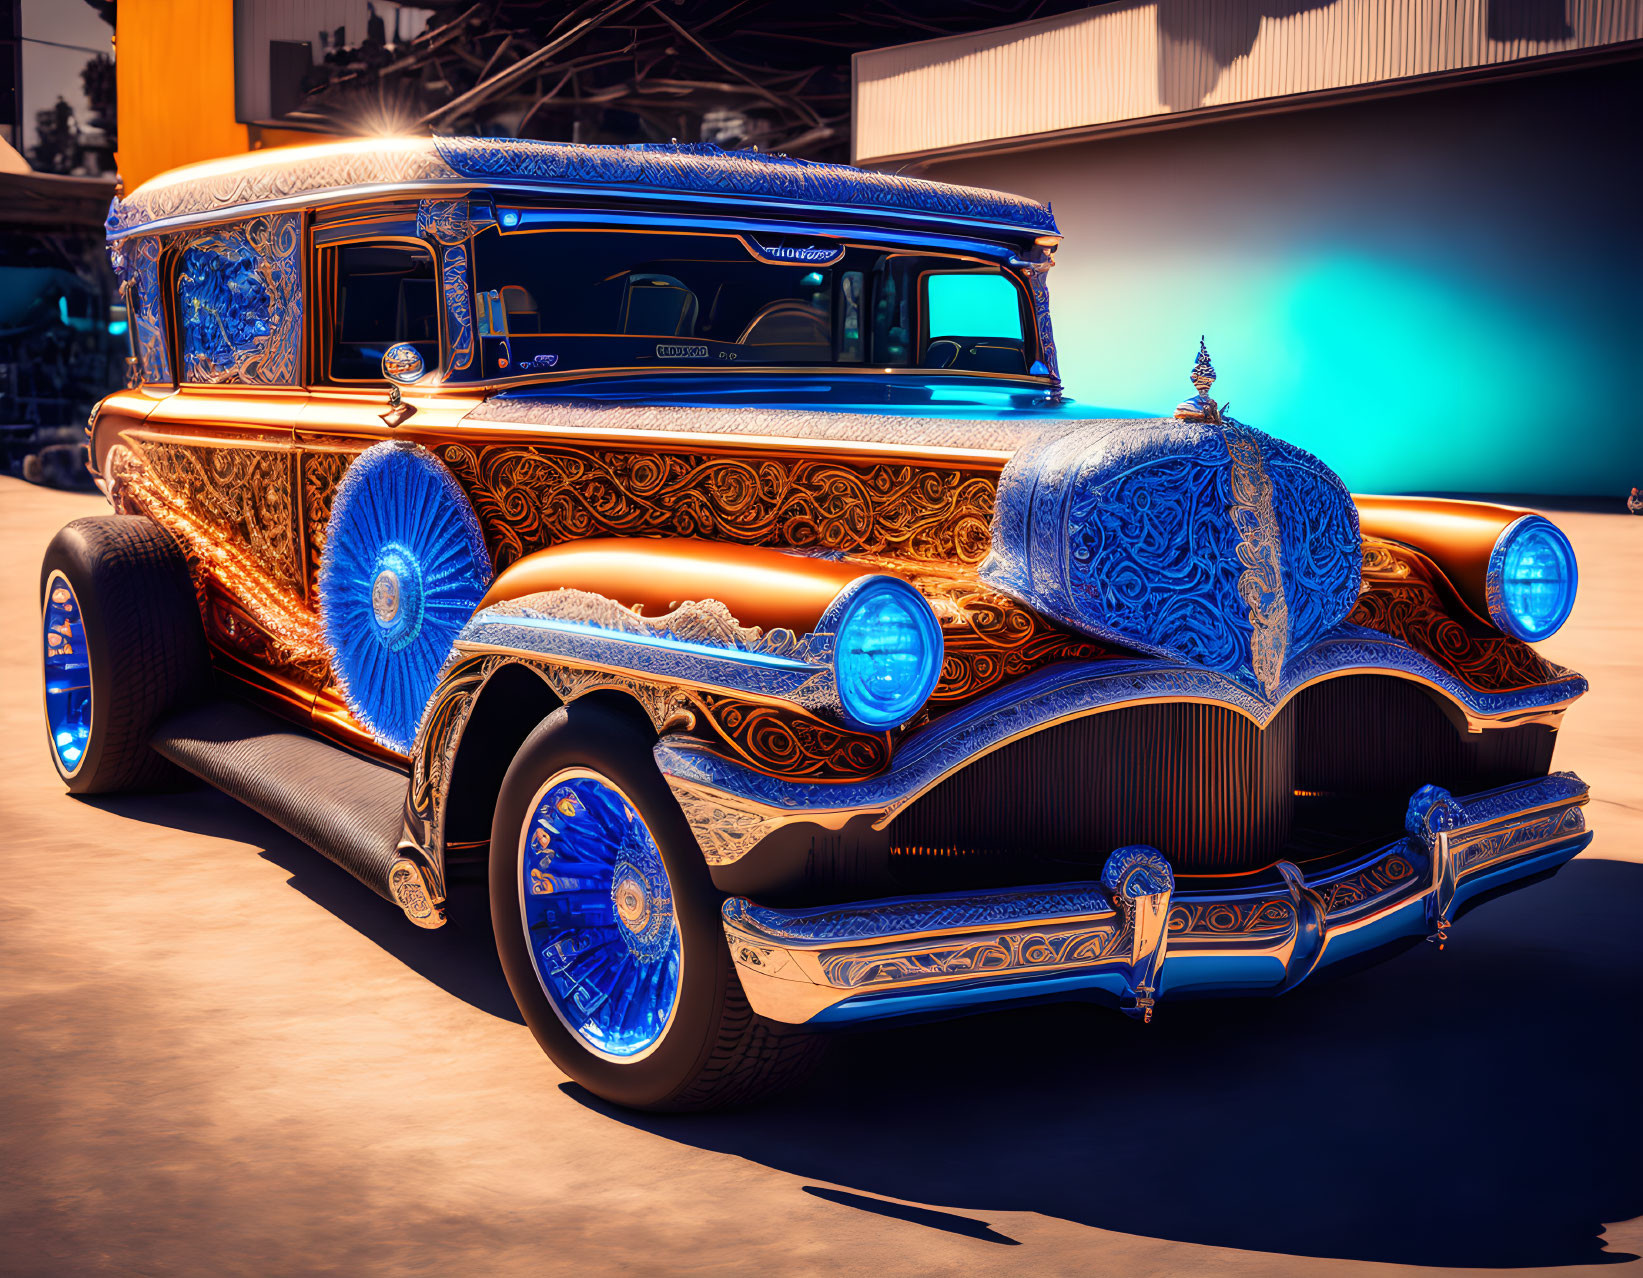 Classic Vintage Car with Blue and Gold Intricate Designs in Warm Light